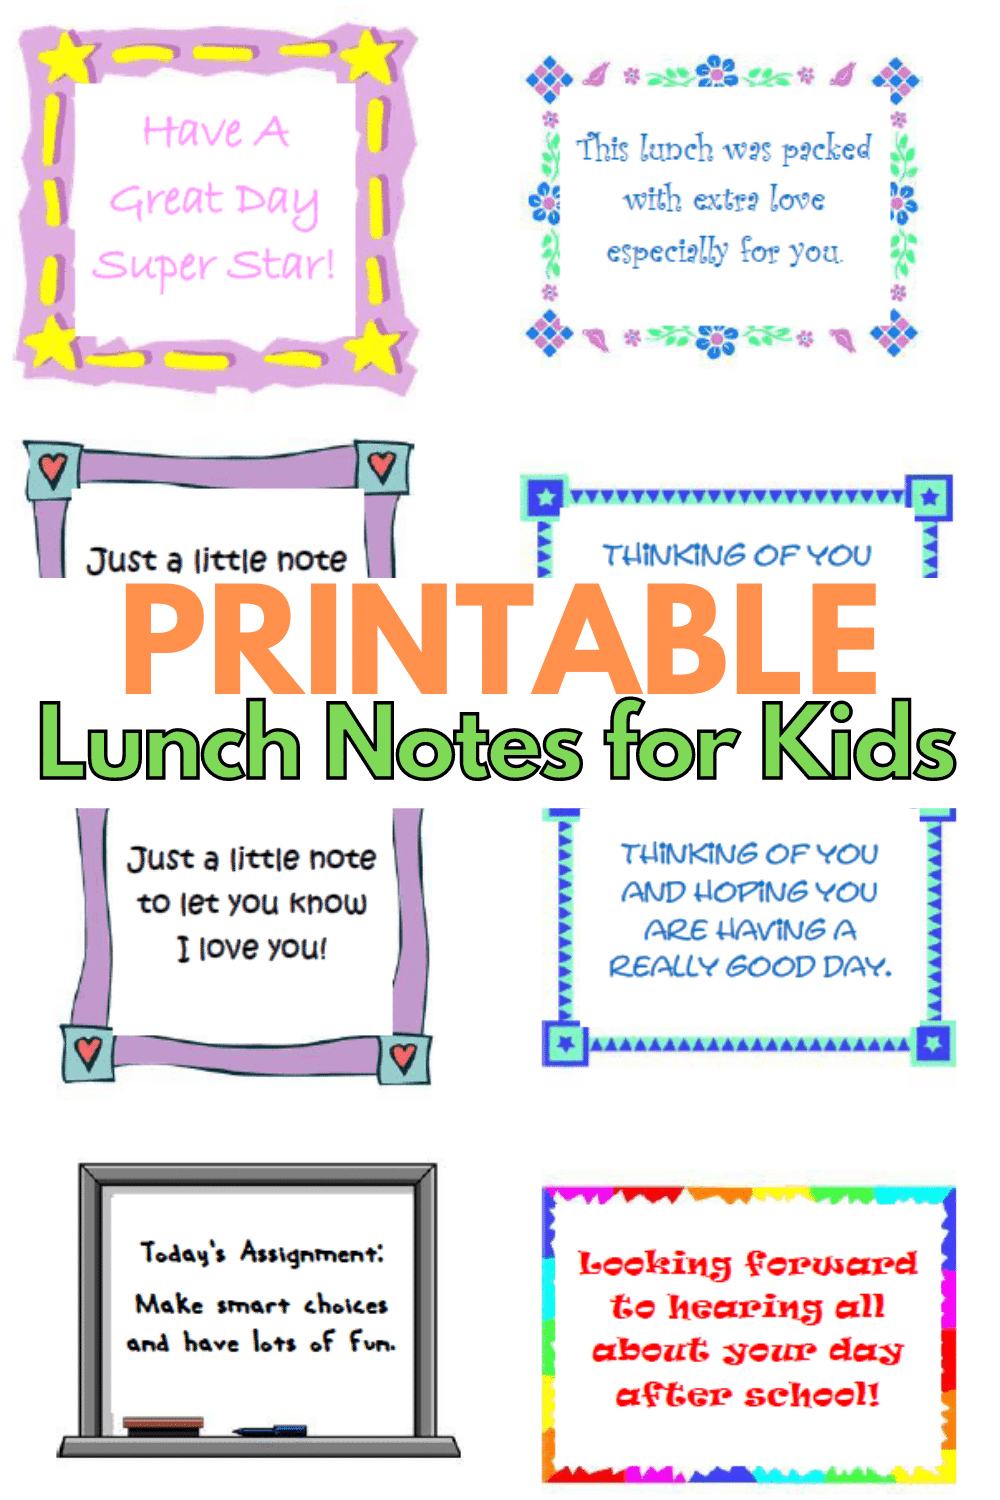 Stay connected to your kids while they're at school by including printable lunch notes in their lunch box to let them know you care. #lunchnotes #forkids #freeprintable via @wondermomwannab